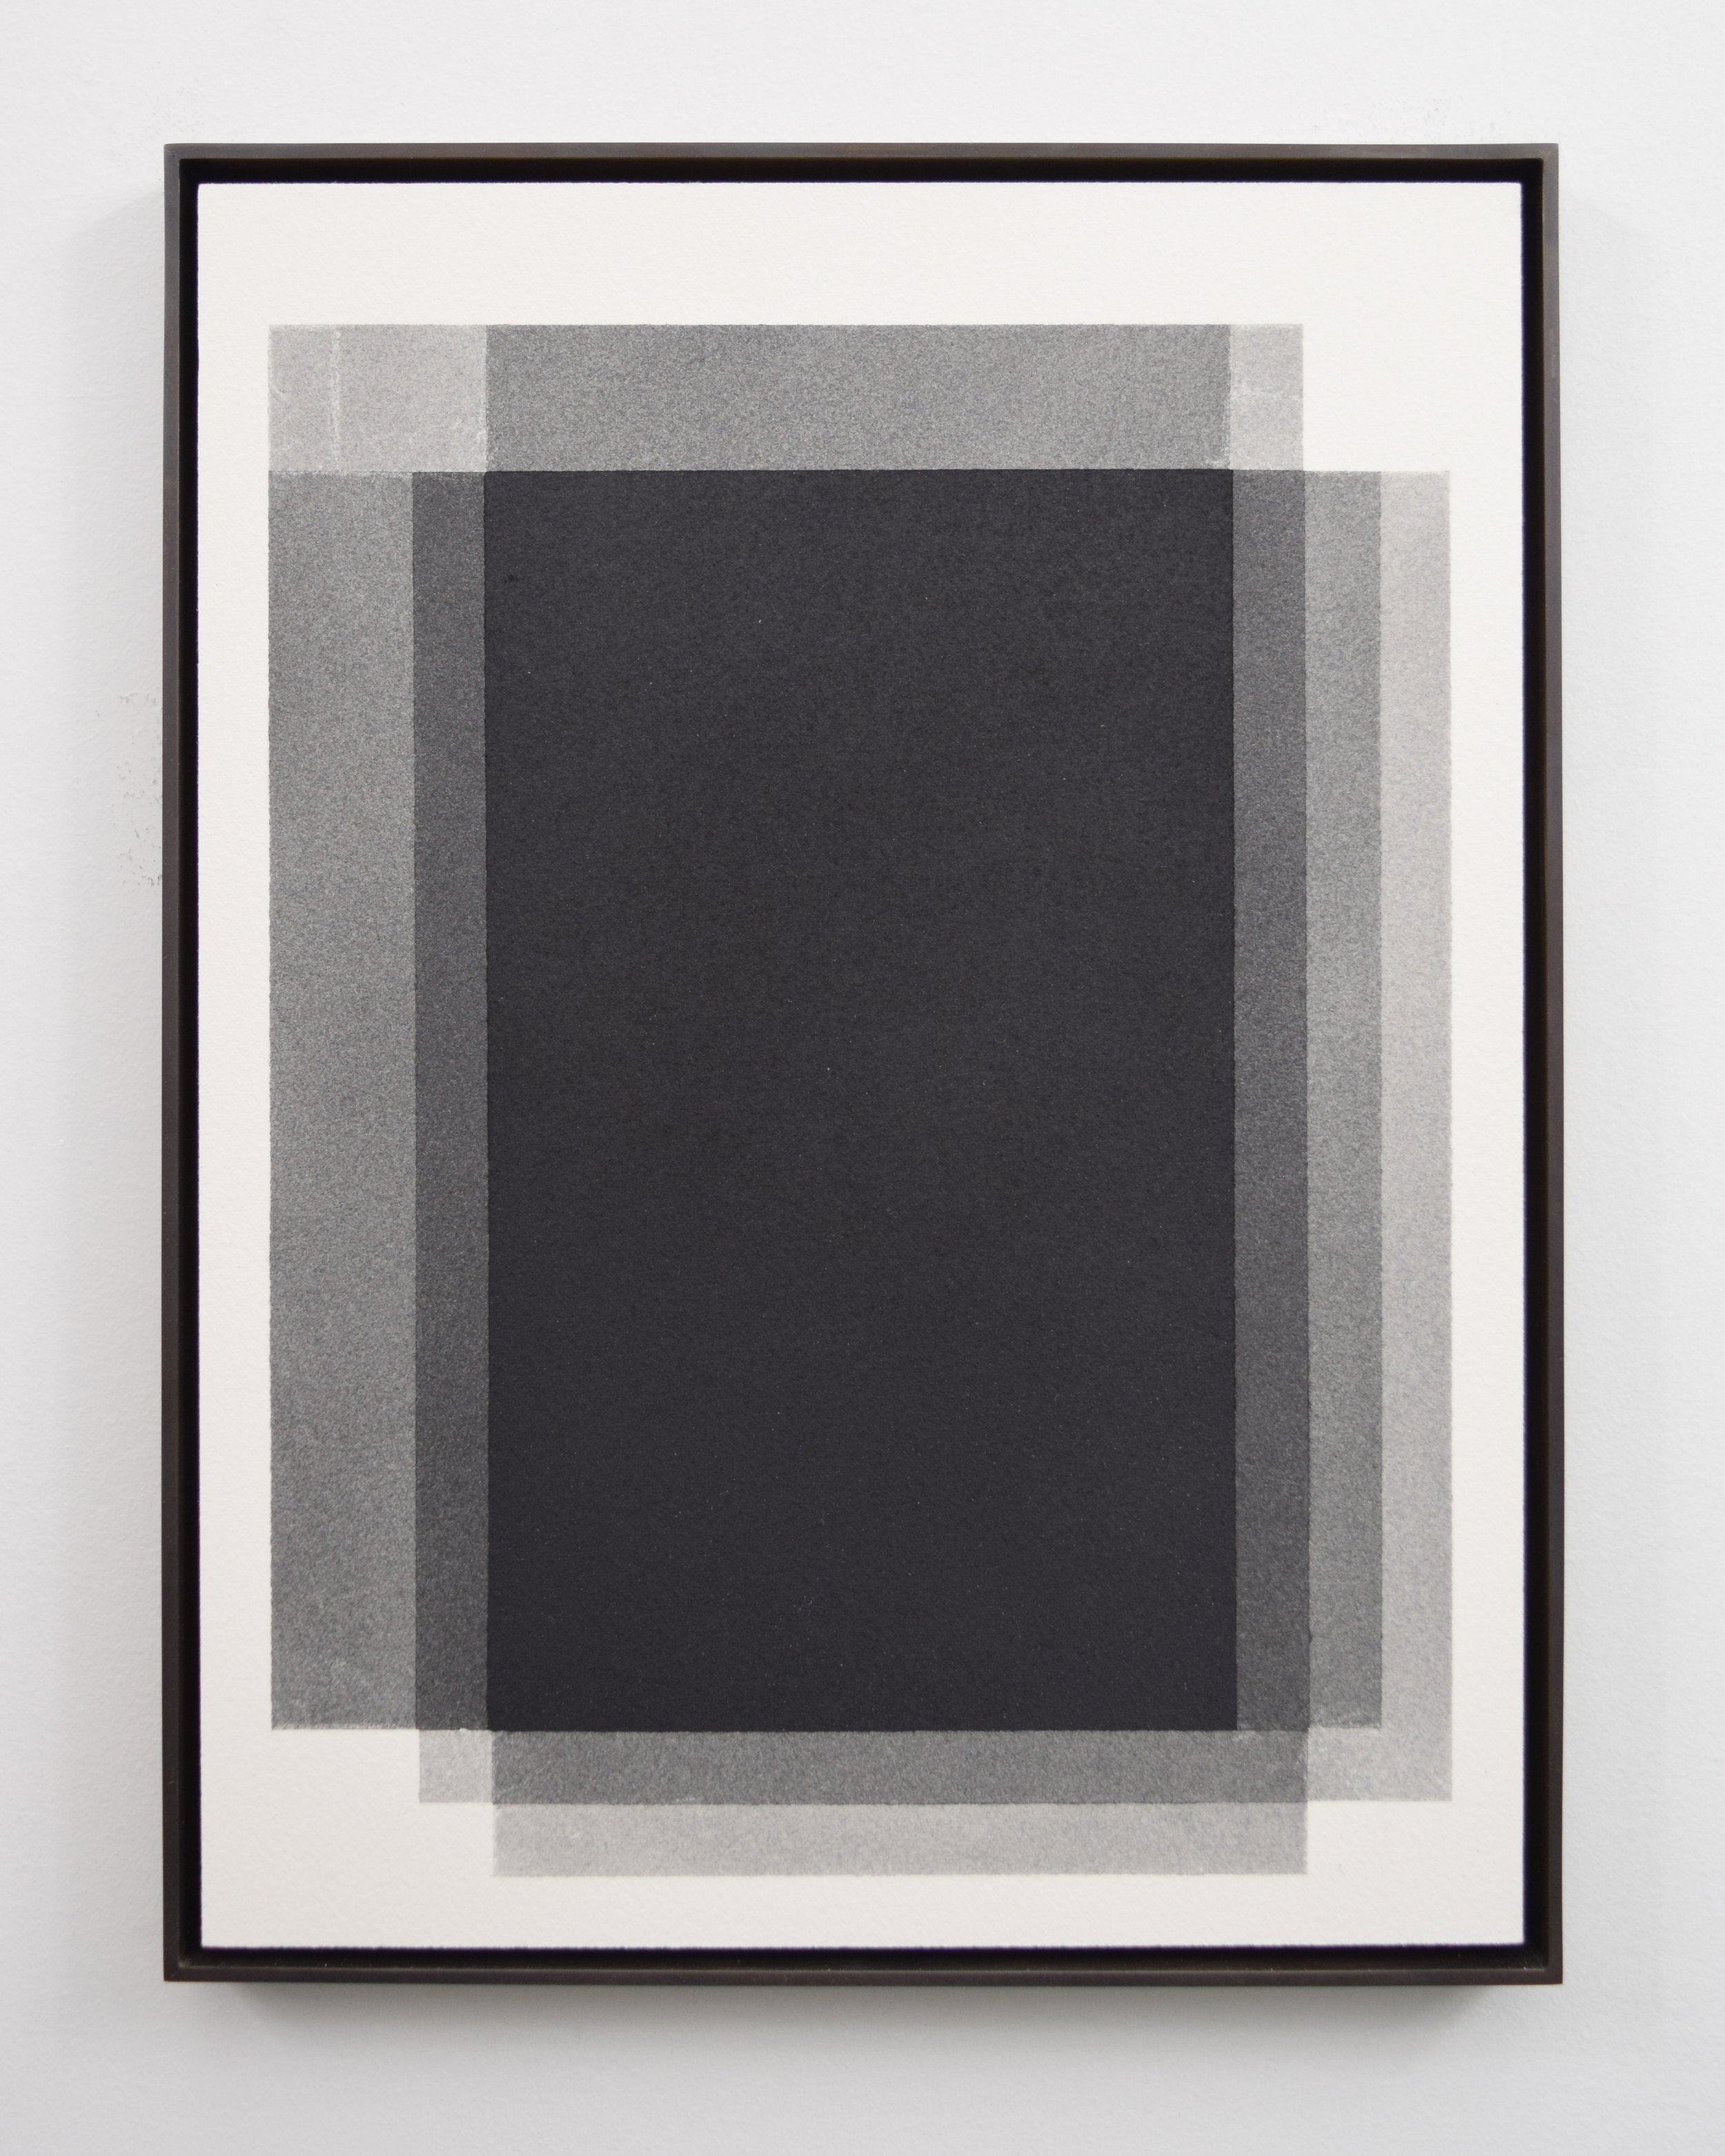  Stephen Somple  12 19 21 7 Black , 2021 Graphite and pigment on paper with oxidized brass frame 9.5" x 12.5" x .5" 